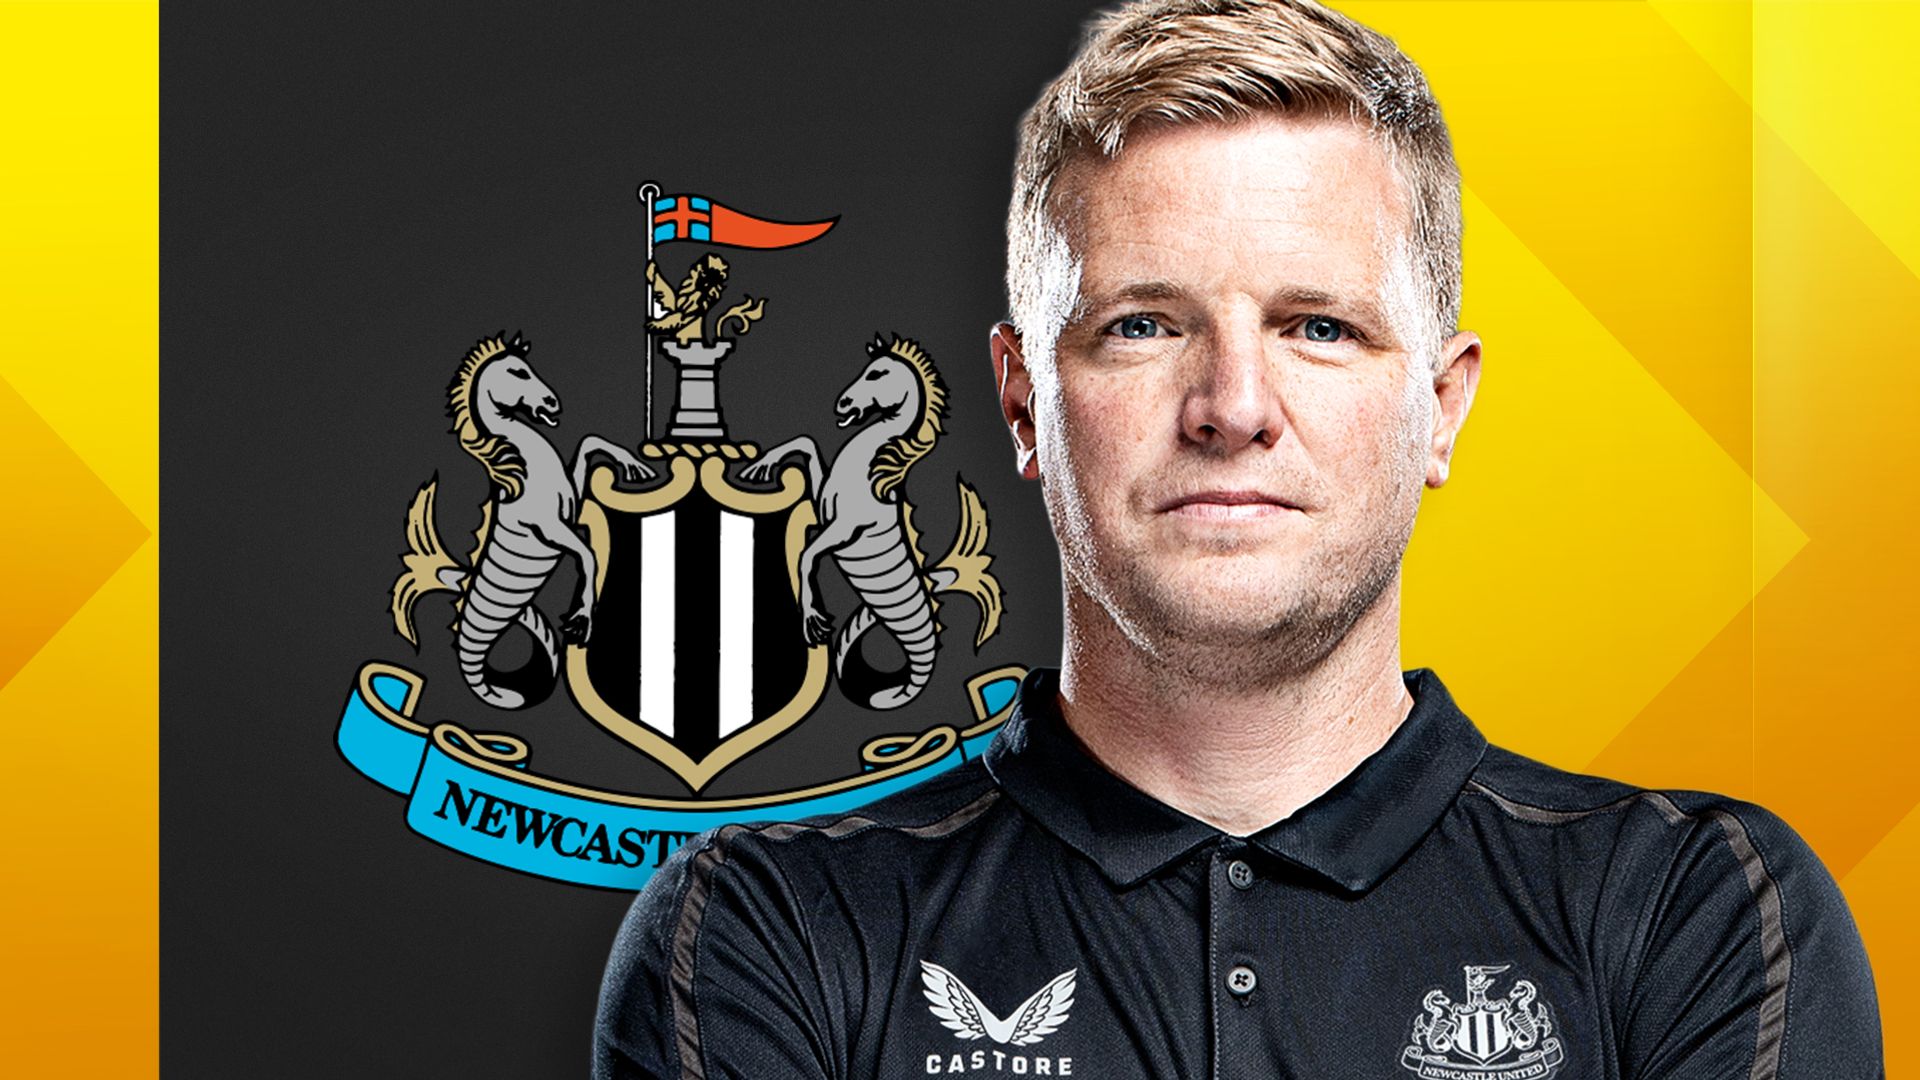 Newcastle transfers: We cannot compete for Ronaldo or Neymar yet - Howe